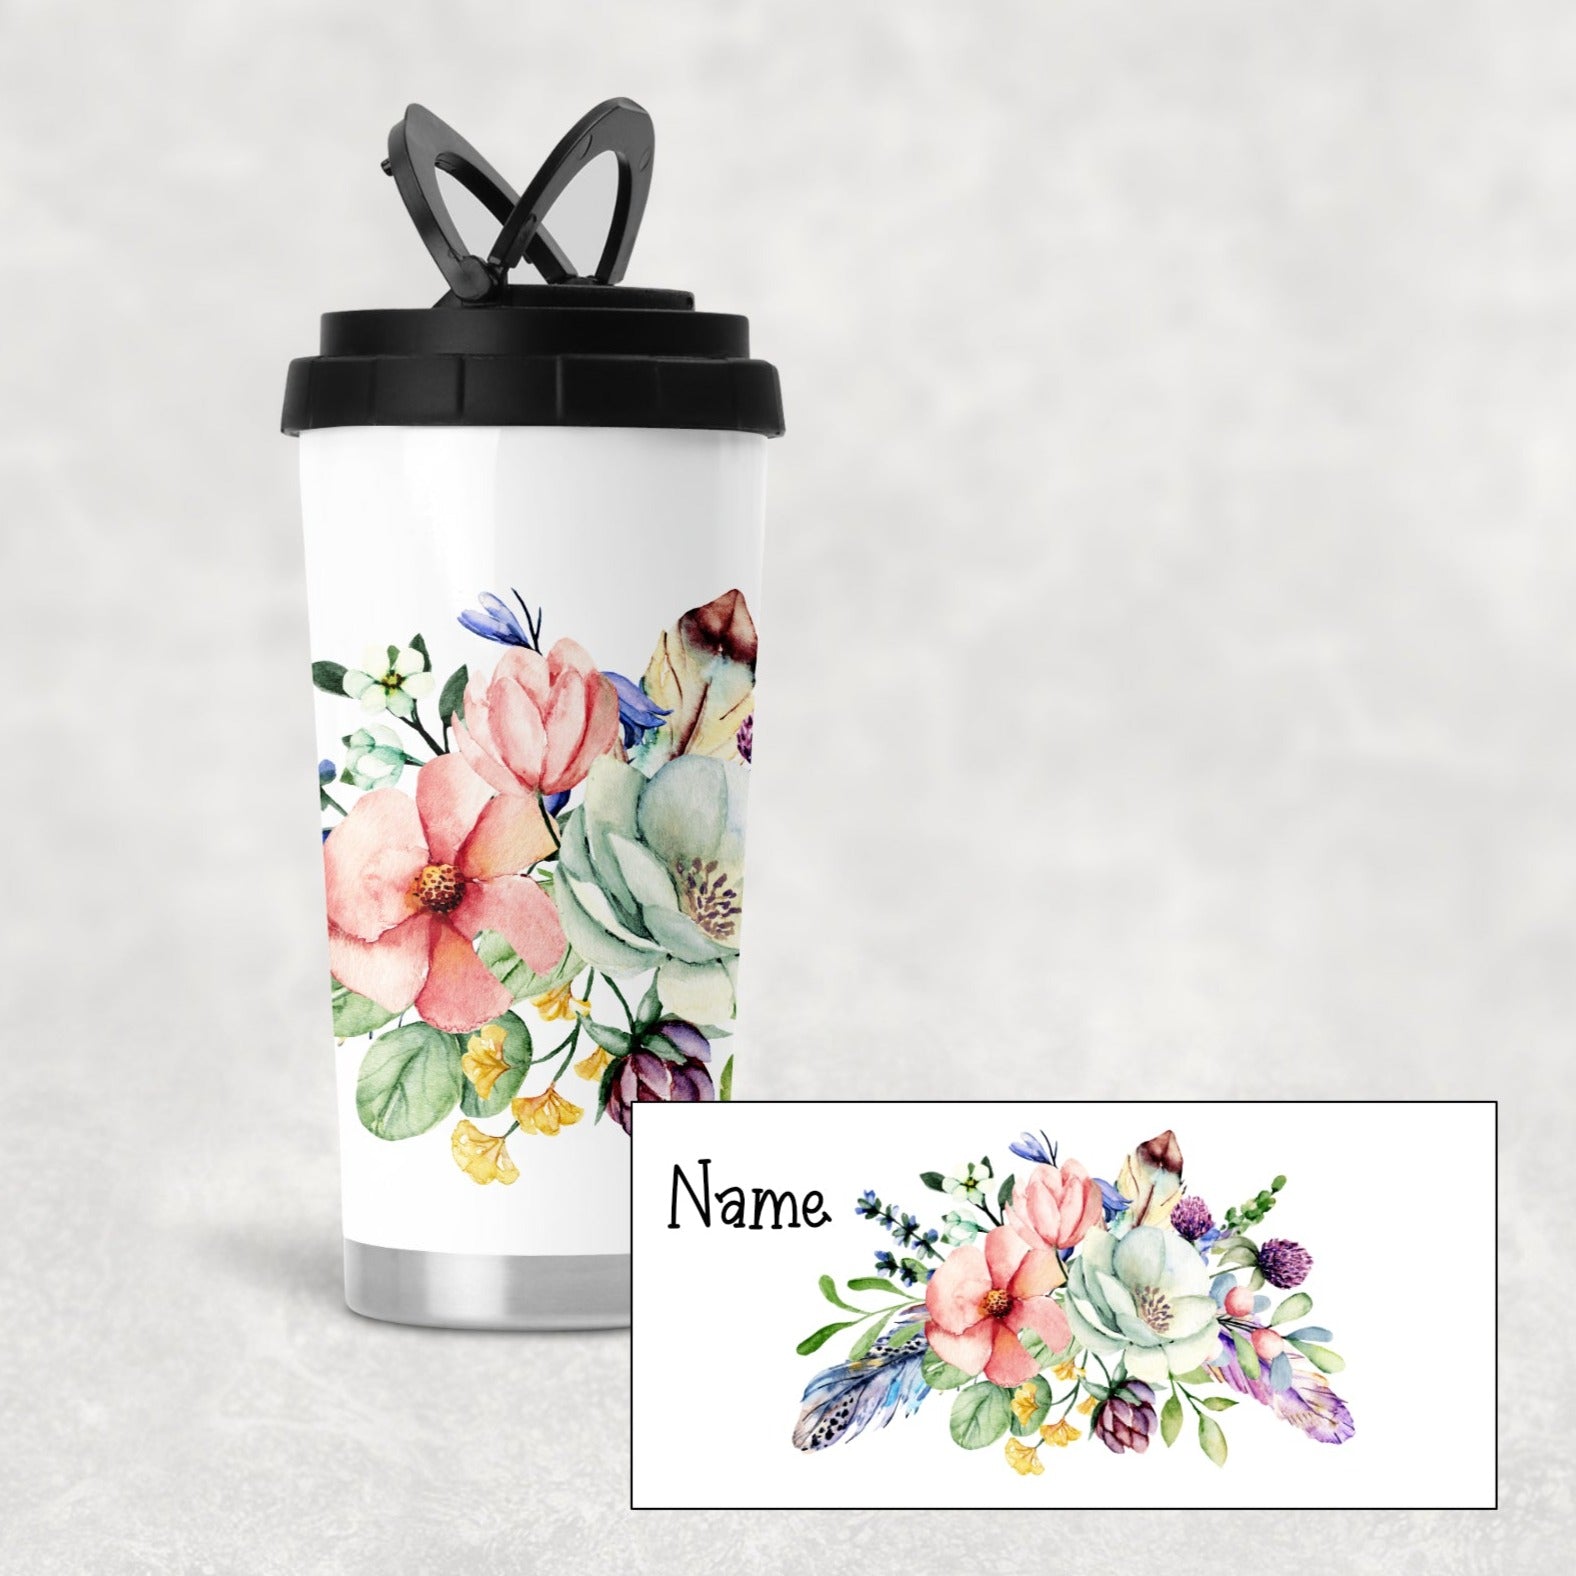 Floral travel mug - Insulated travel mug - Coffee on the go - M&amp;G - Unique gifts to give